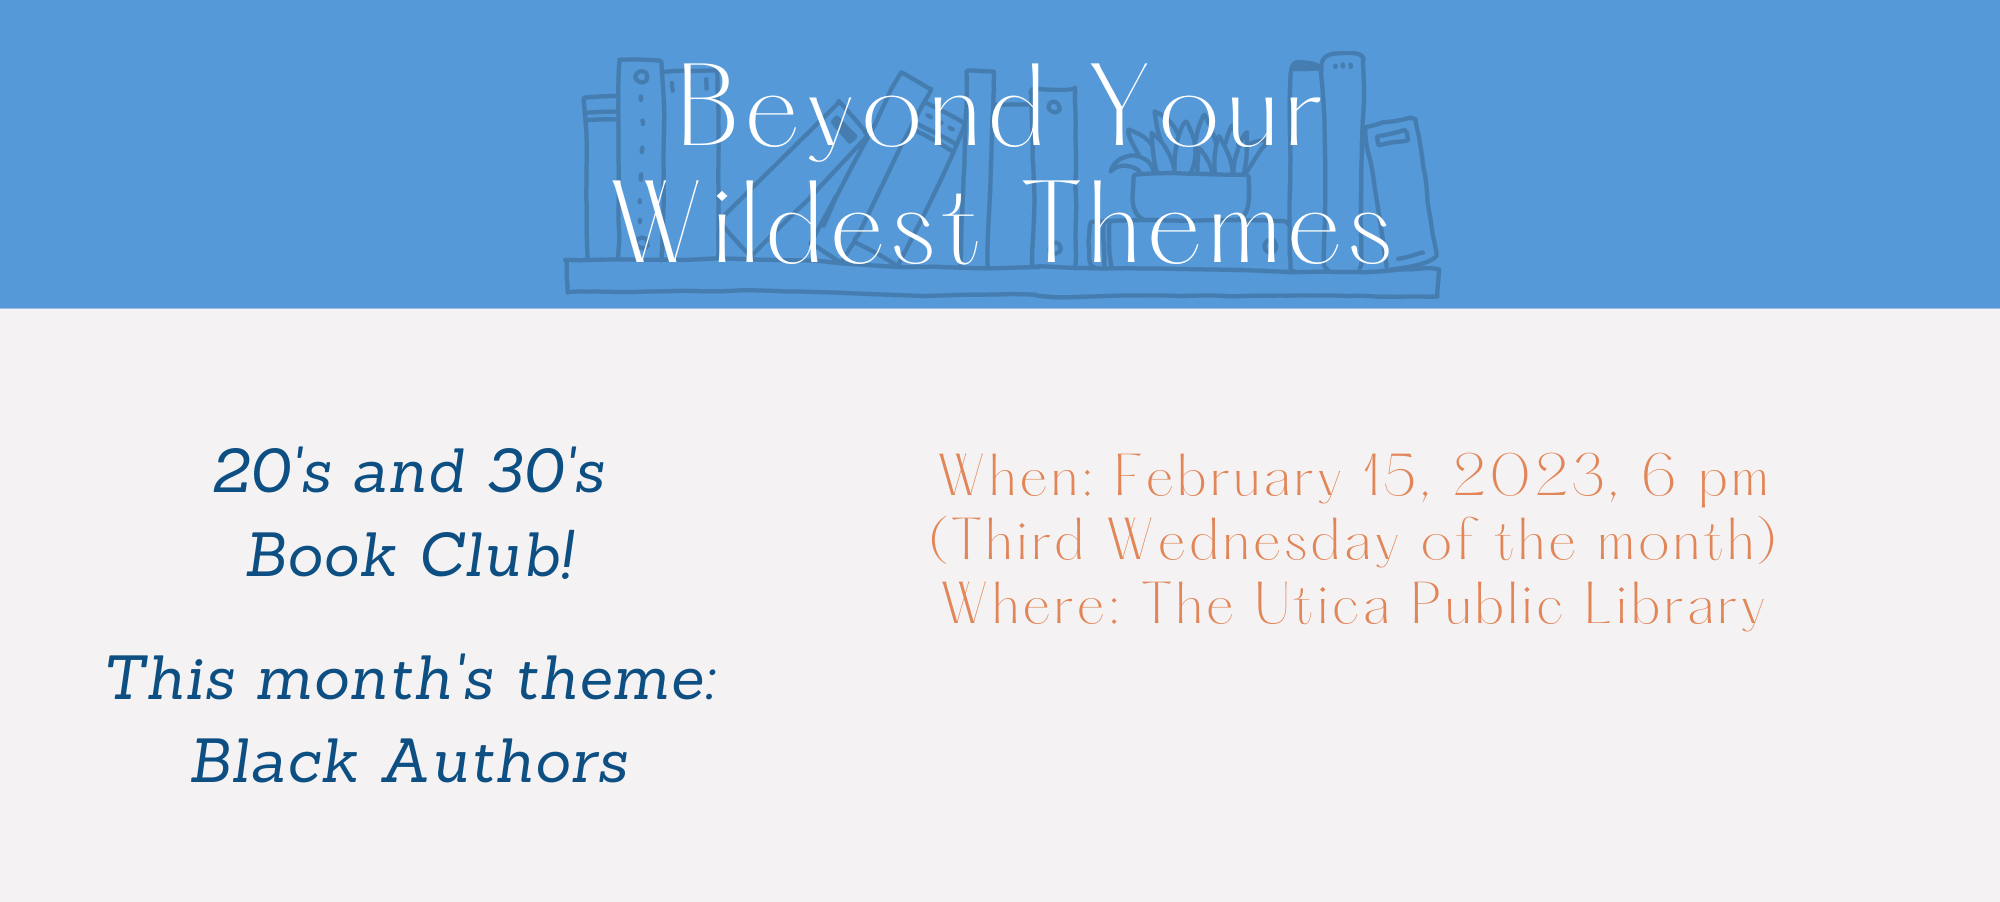 Beyond Your Wildest Themes 10.2 4.6 in